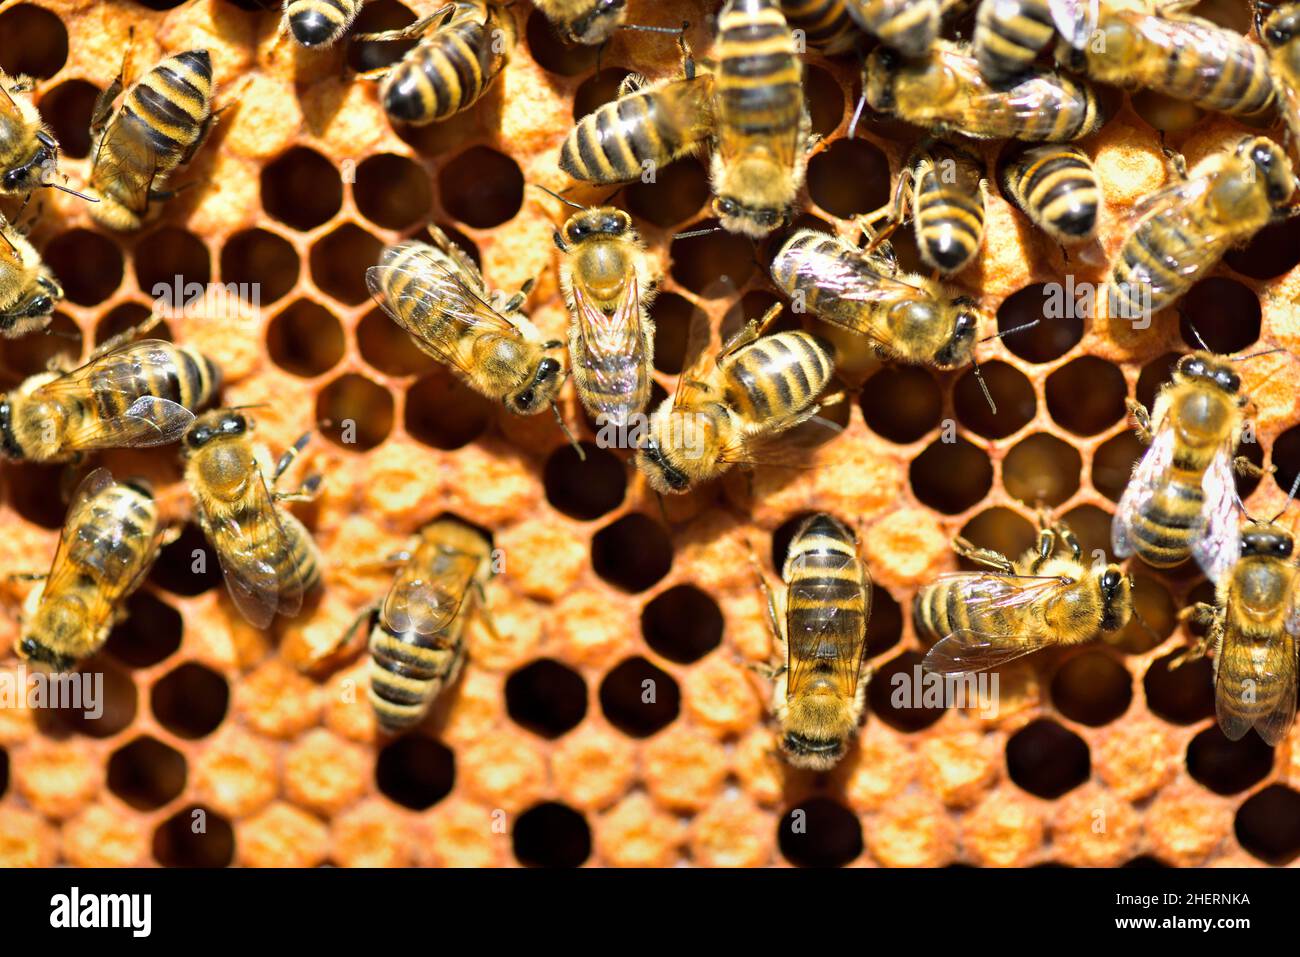 Workers of the honey bee (Apis mellifera var. carnica) on honeycomb with capped brood cells, Bavaria, Germany Stock Photo